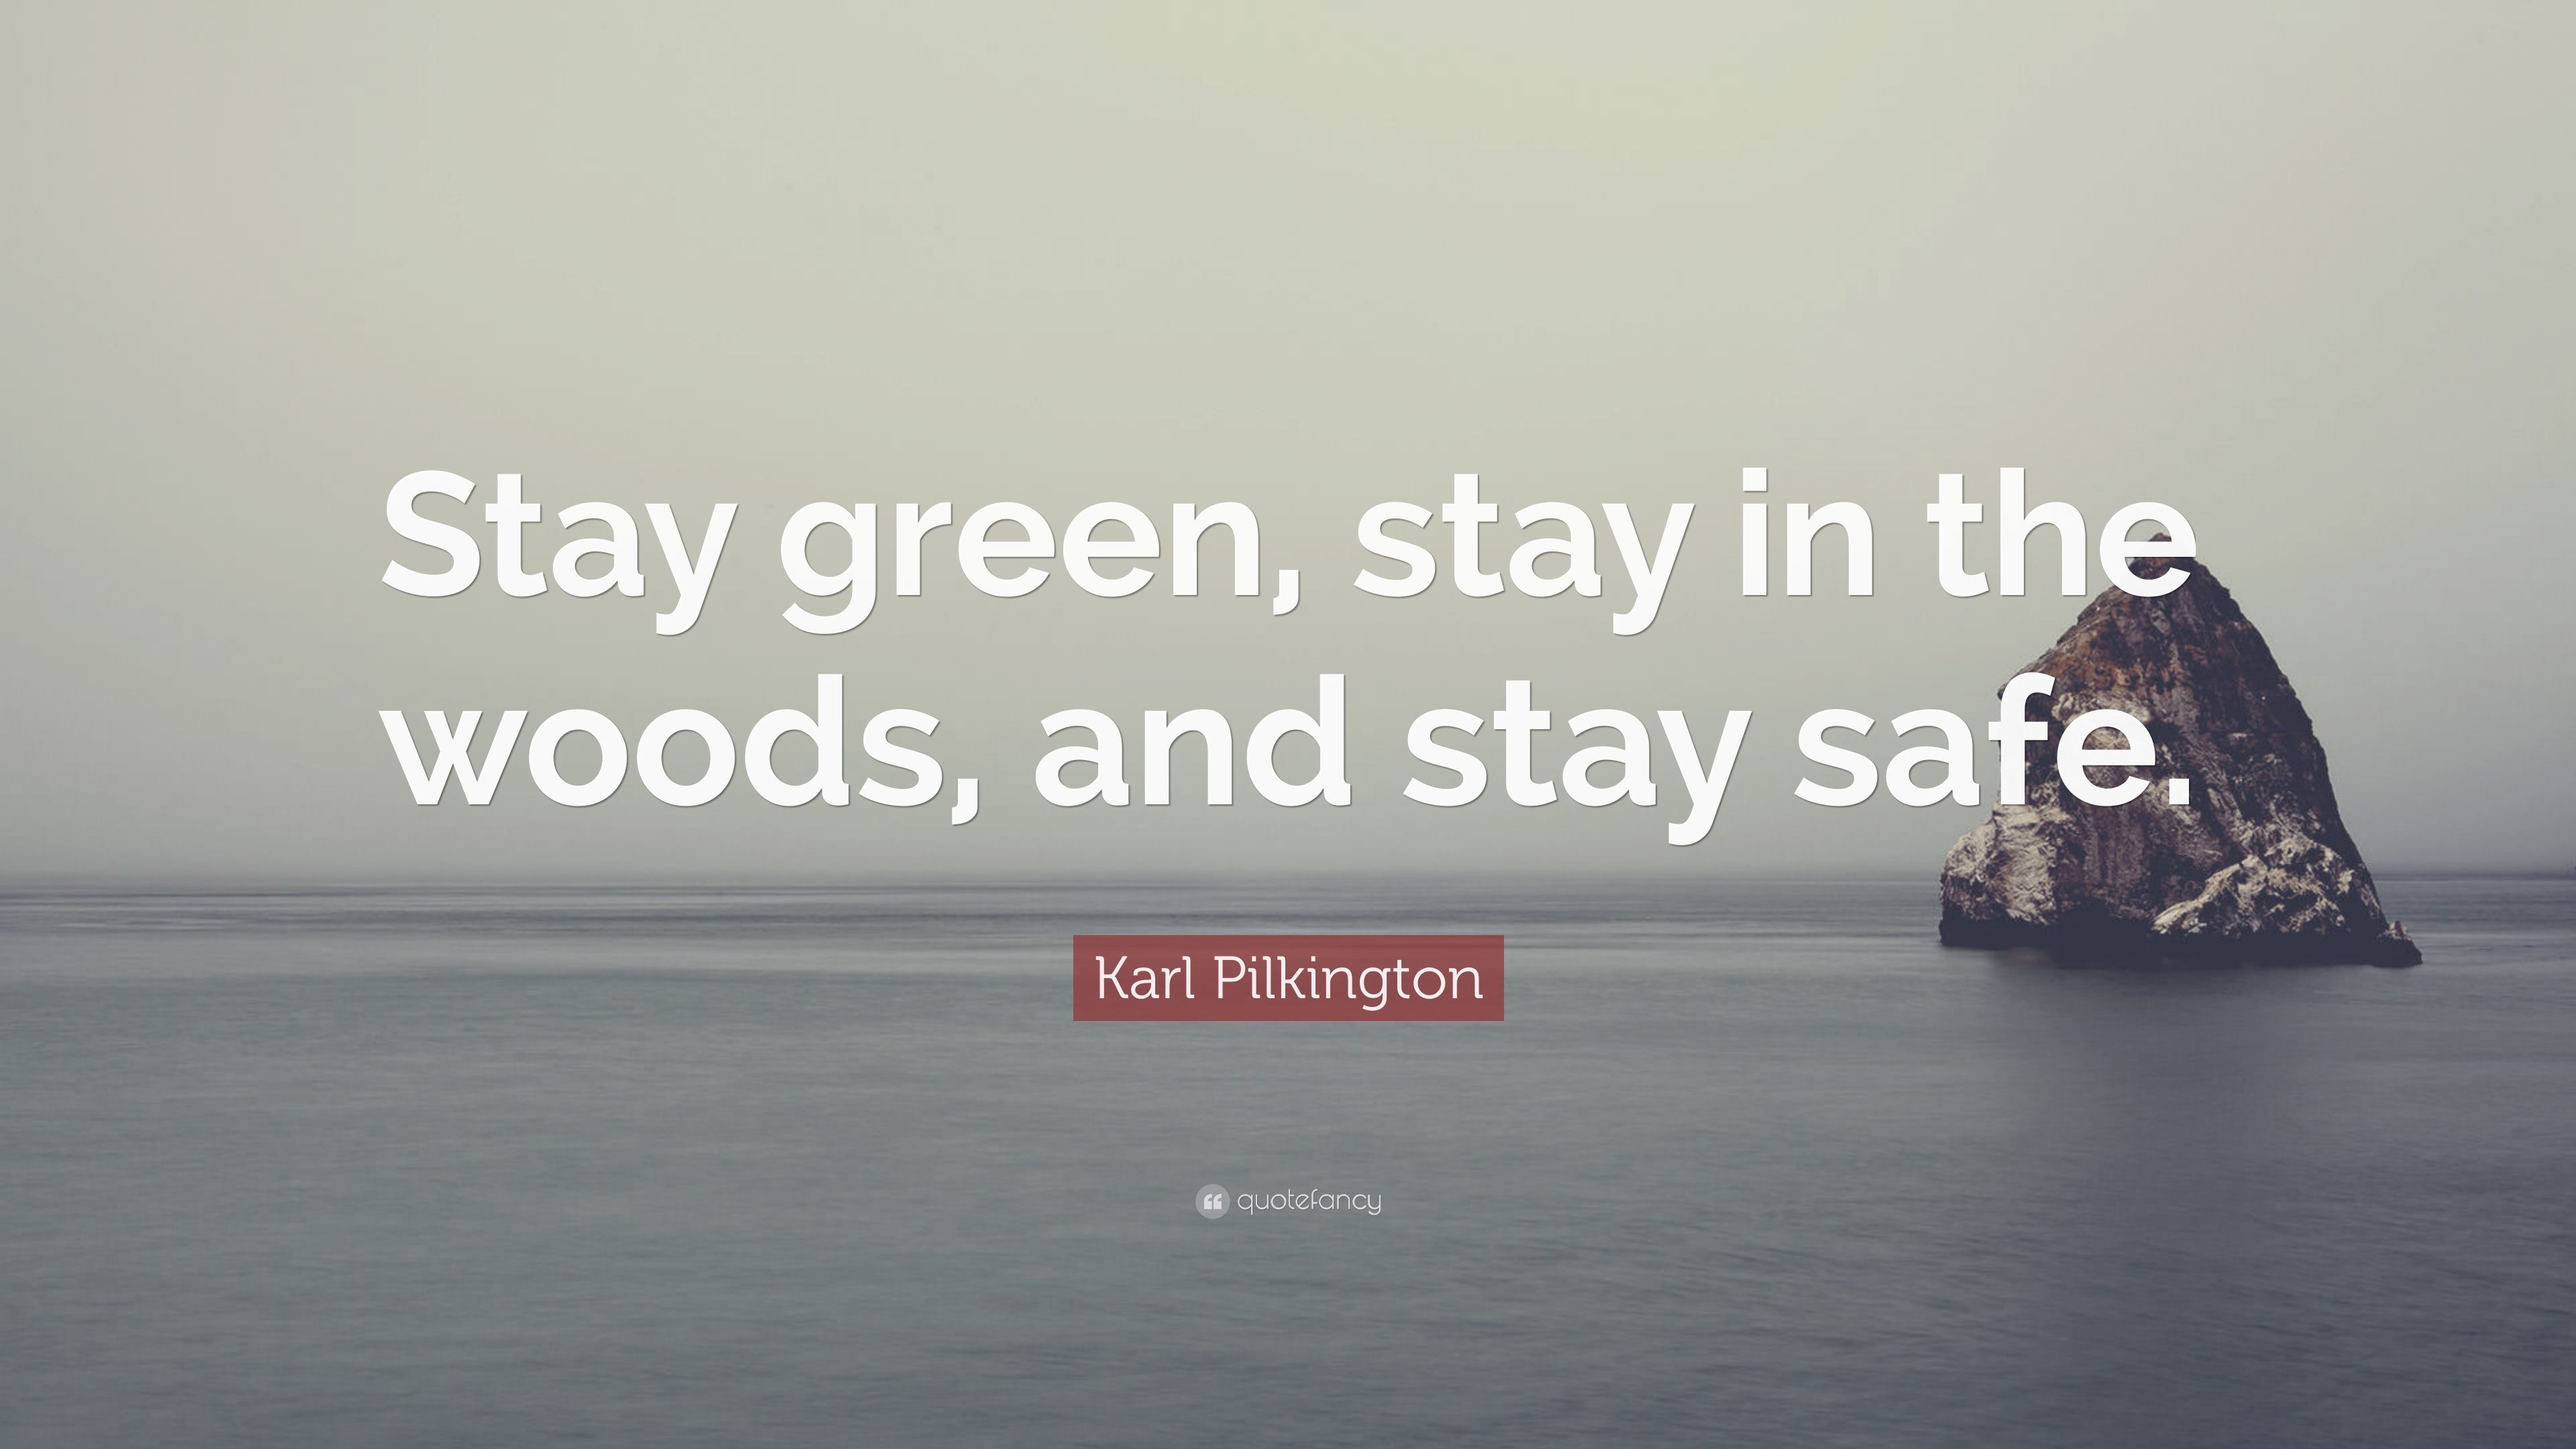 Karl Pilkington Quote: “Stay green, stay in the woods, and stay